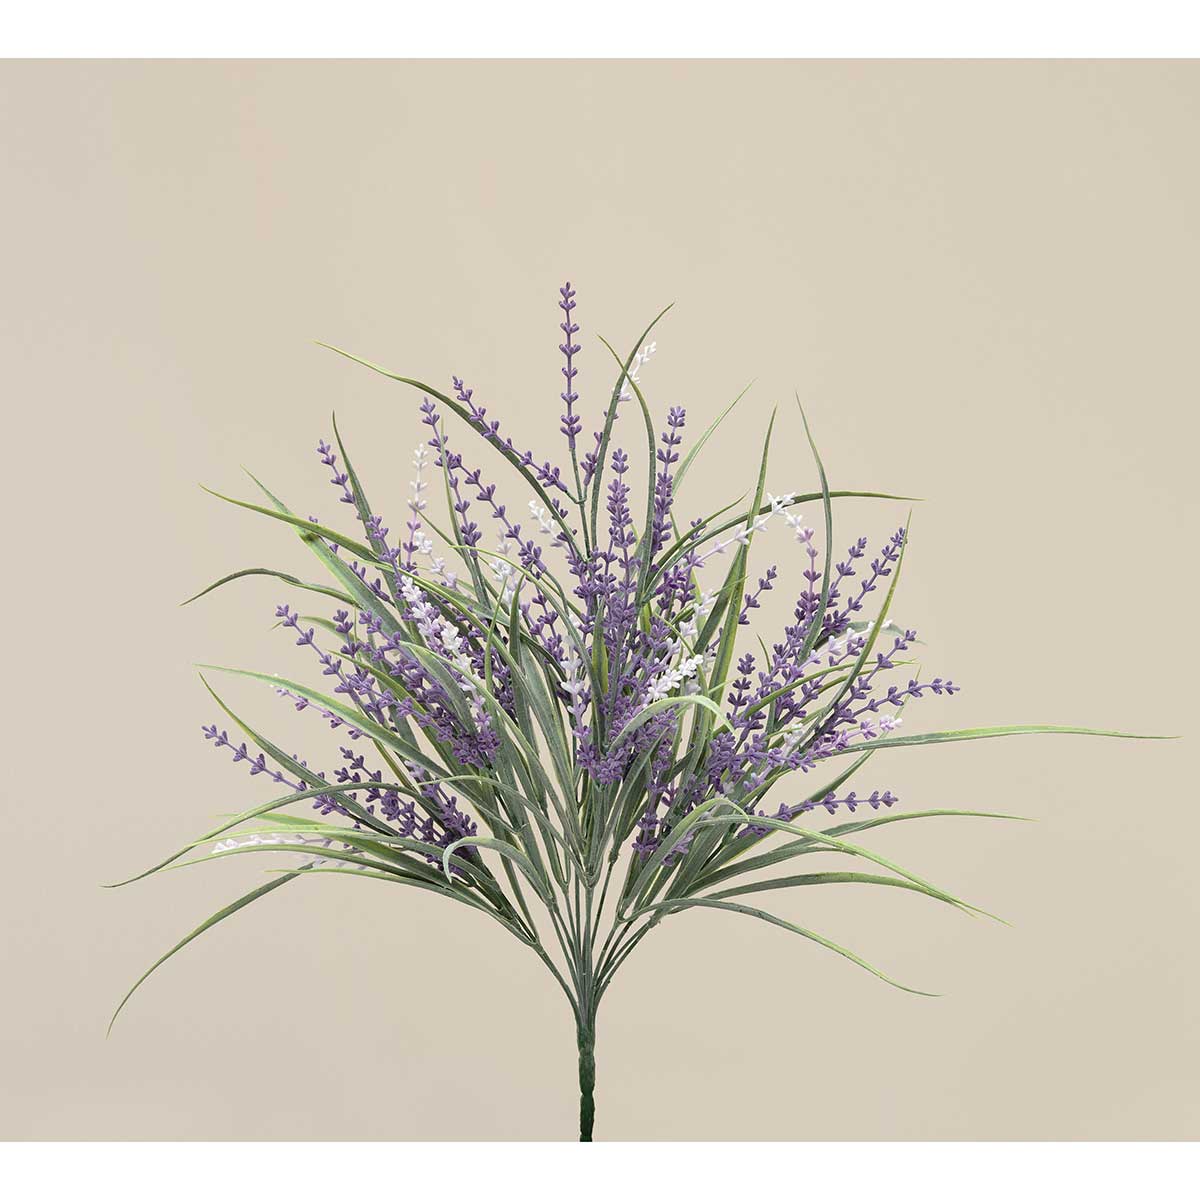 BUSH LAVENDER AND SPIKE GRASS 18IN X 19IN PURPLE